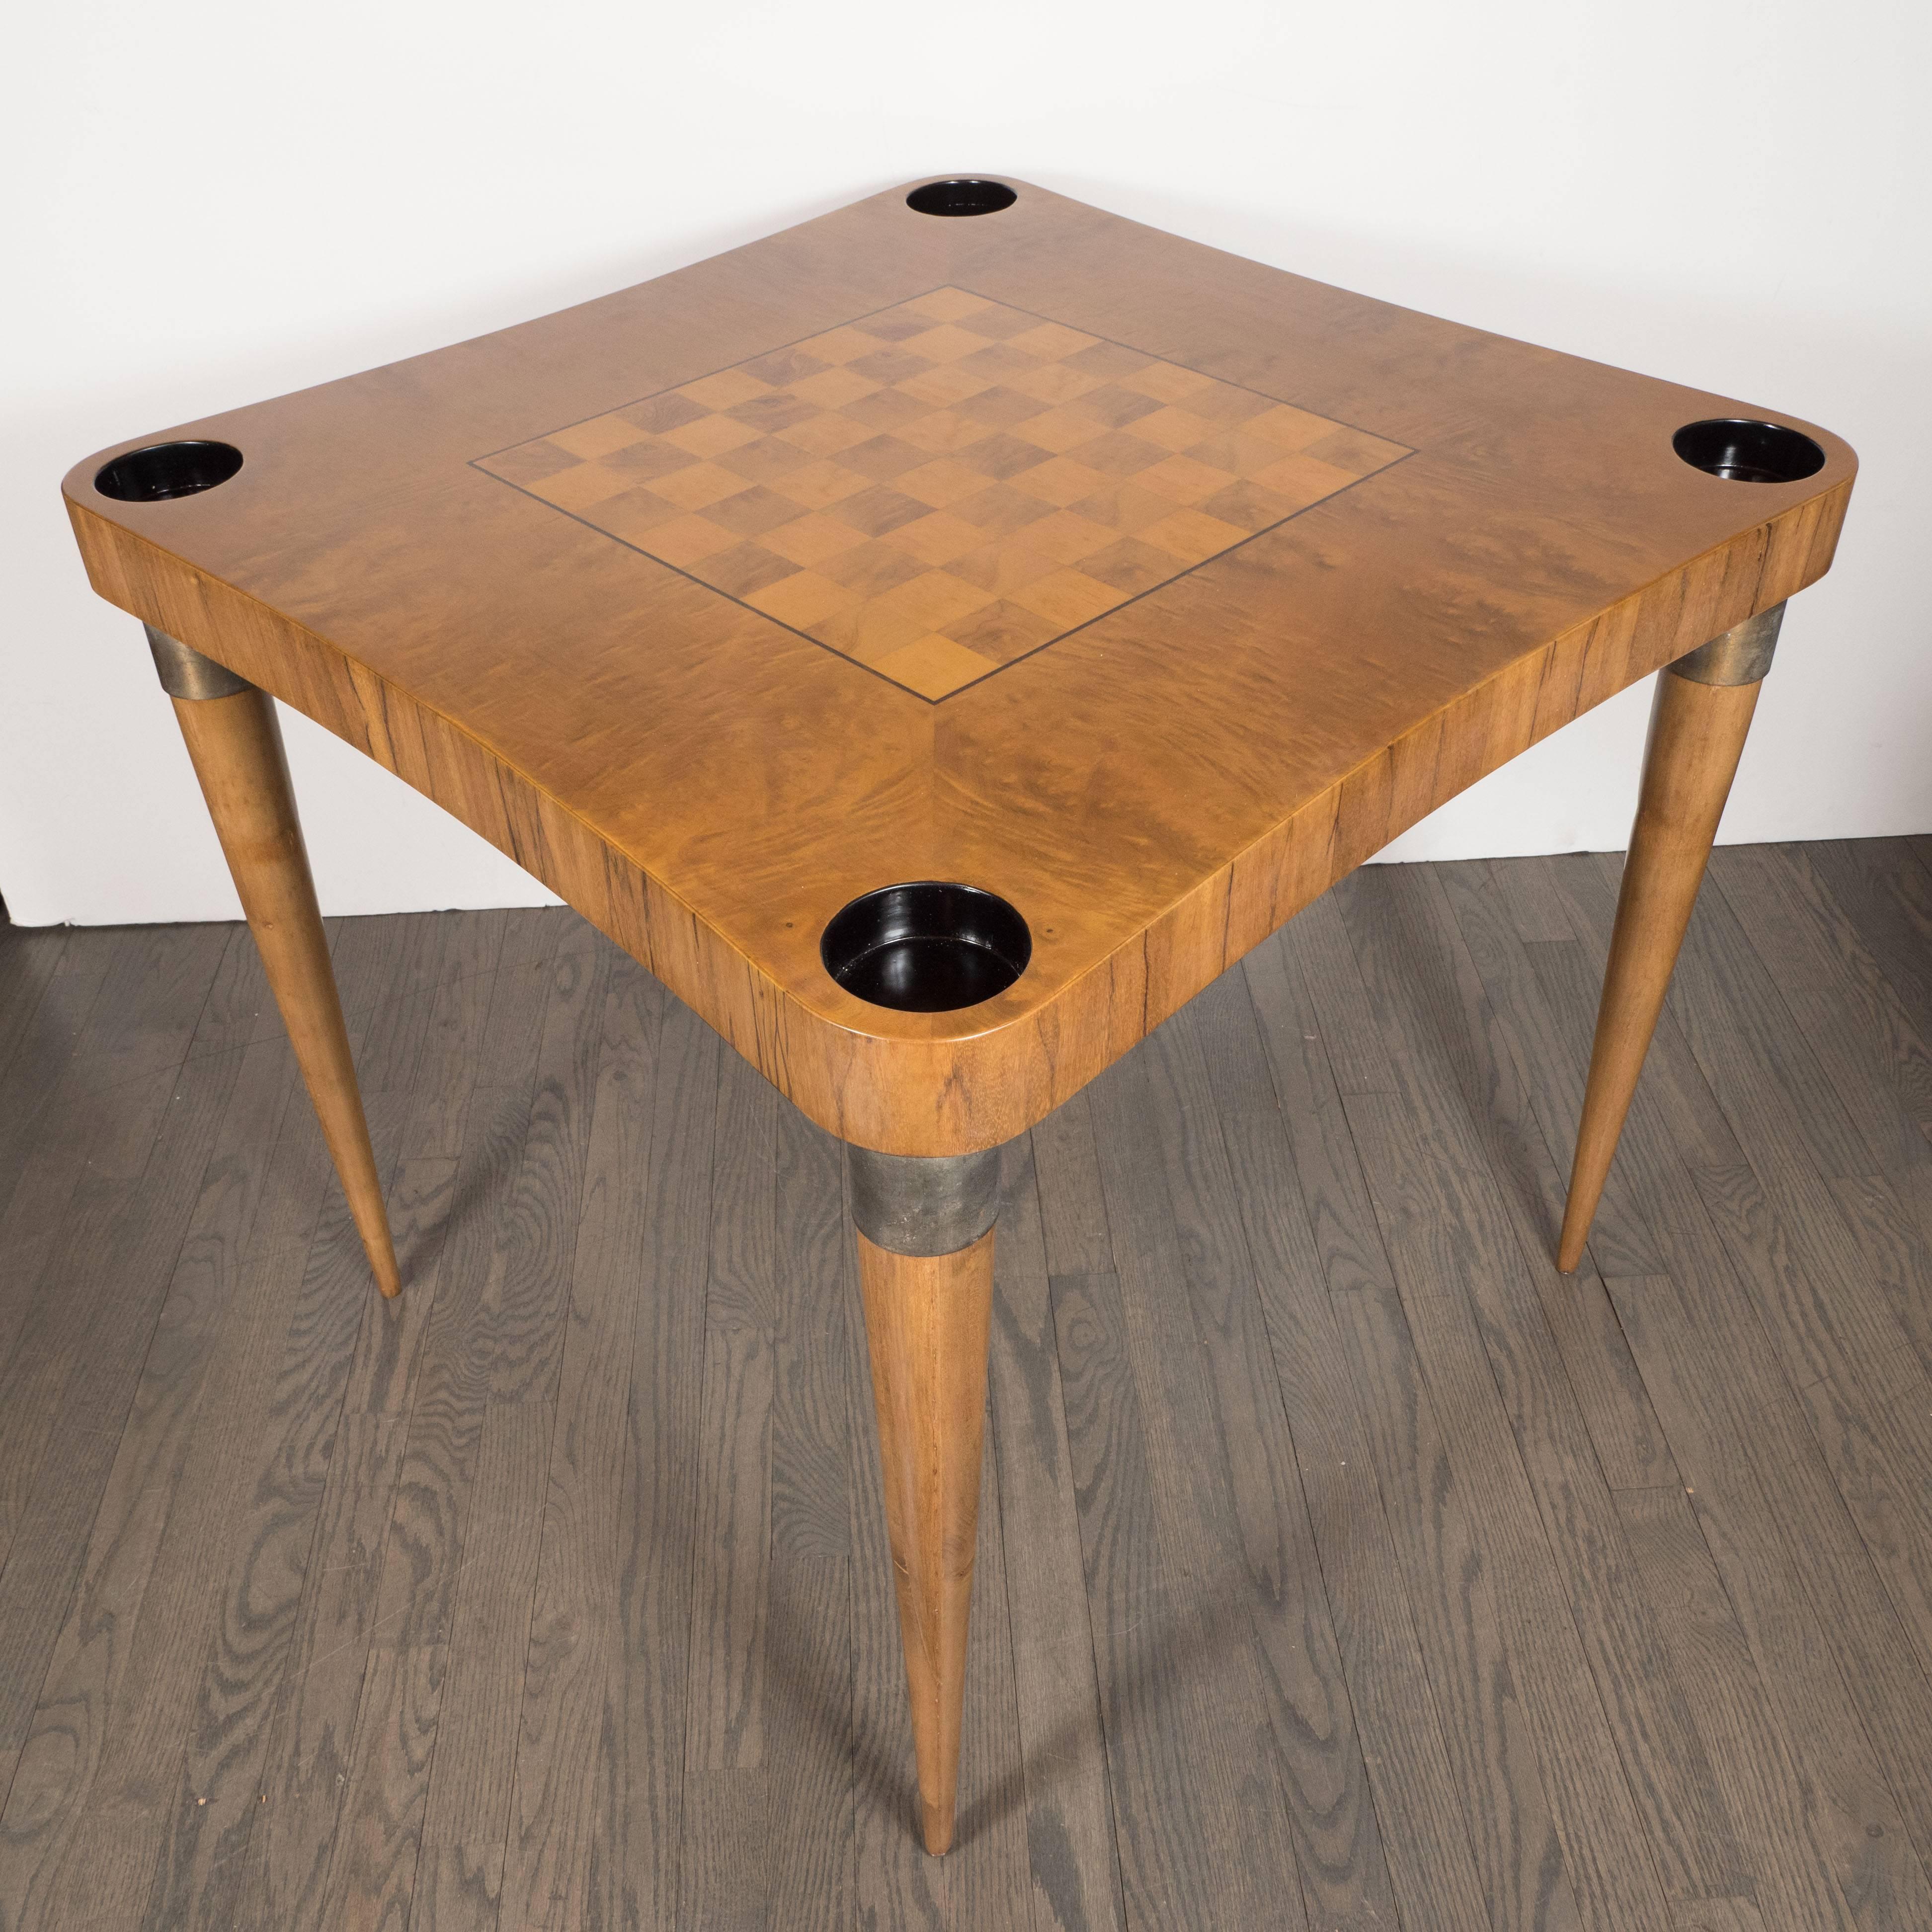 American Midcentury Bookmatched Burled Elm and Paldao Wood Game Table by Gilbert Rohde